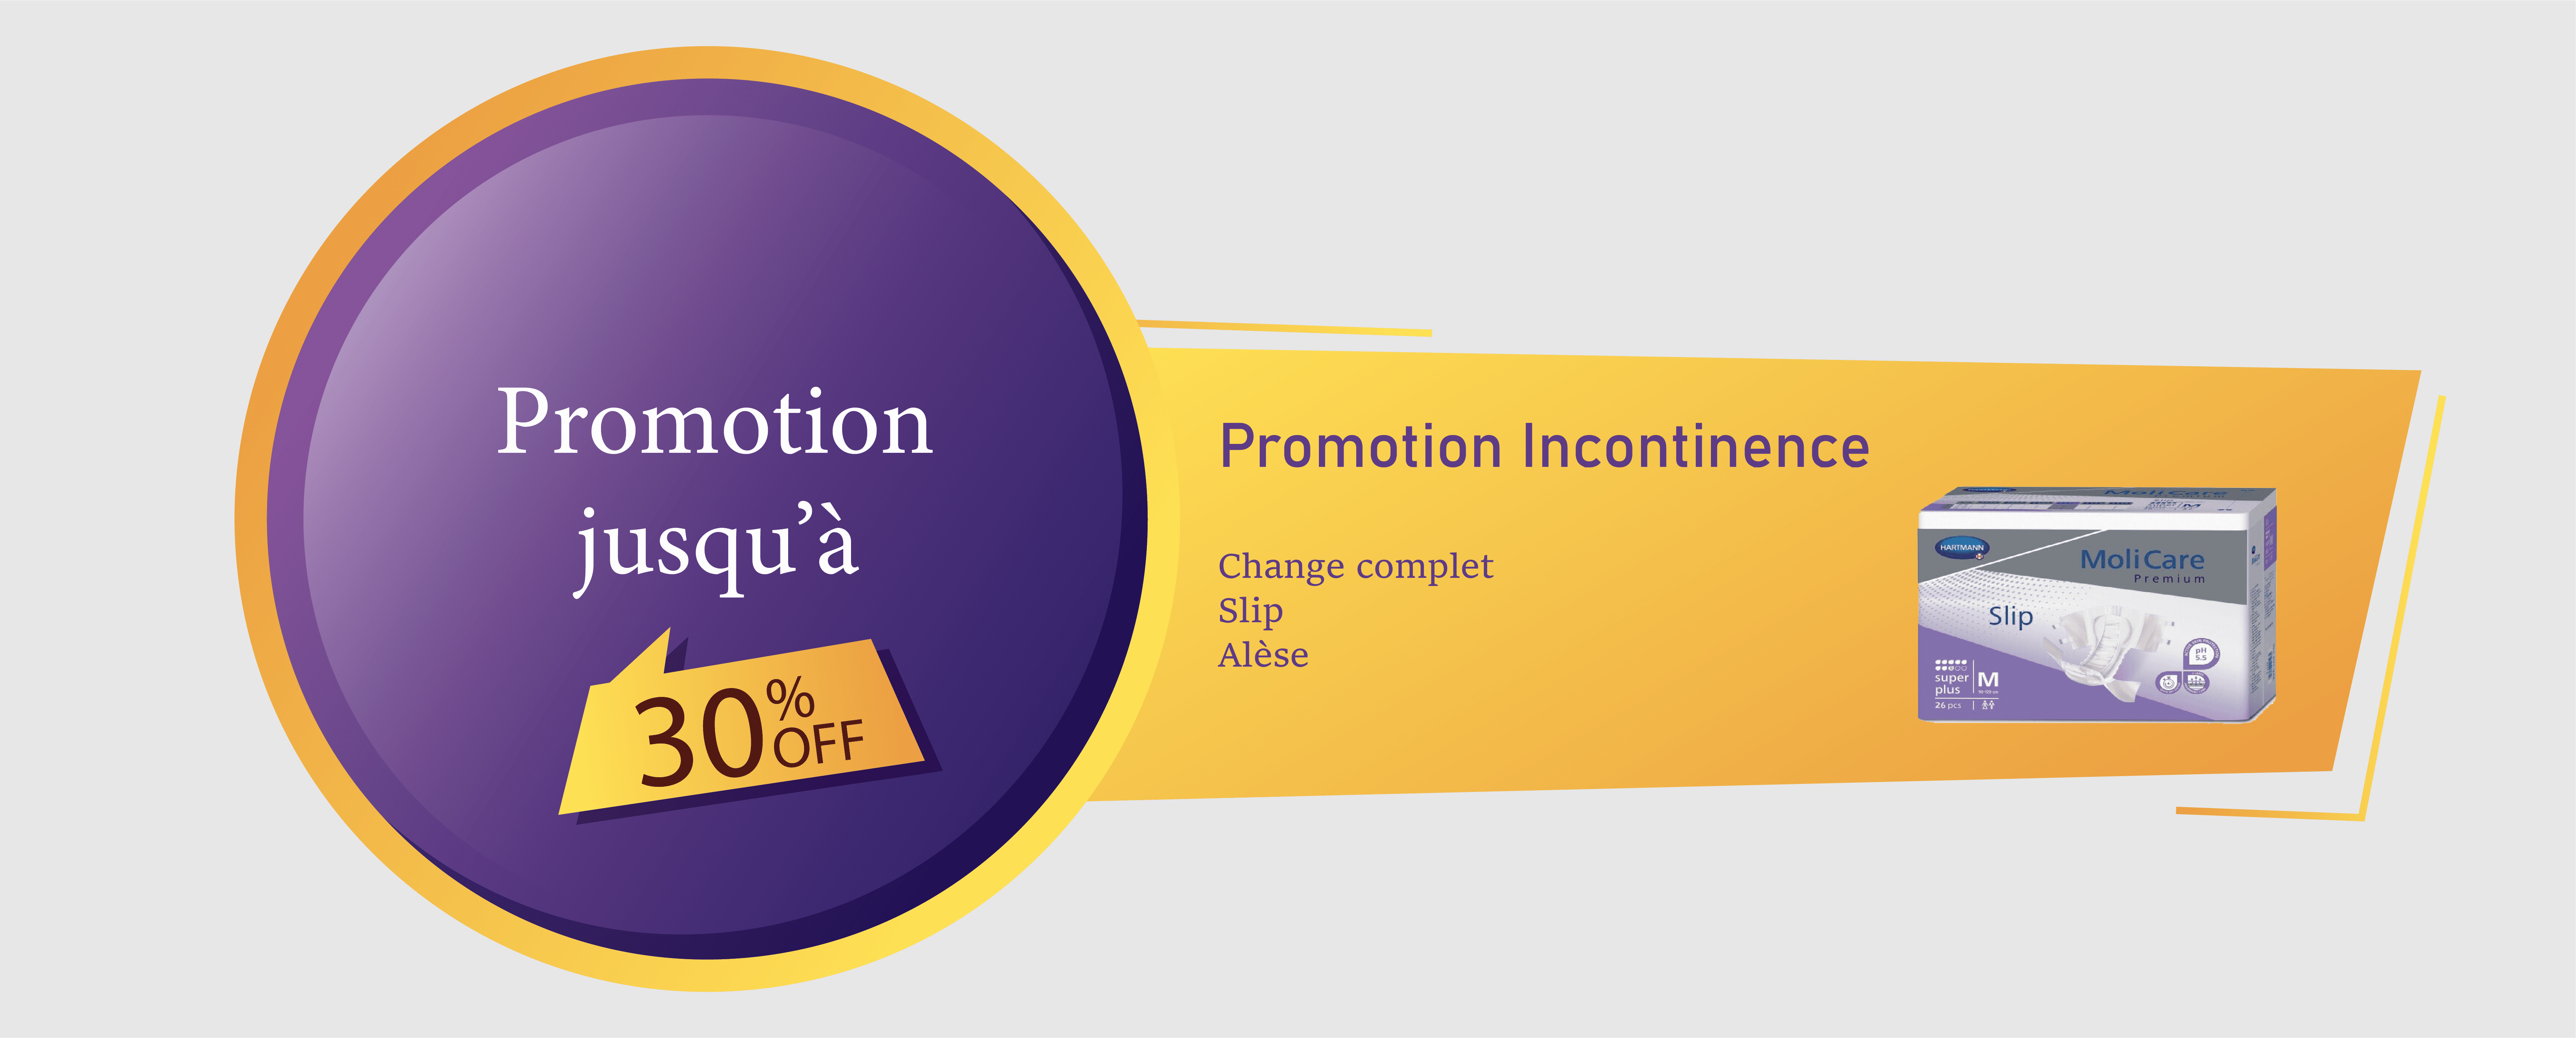 Promotion incontinence